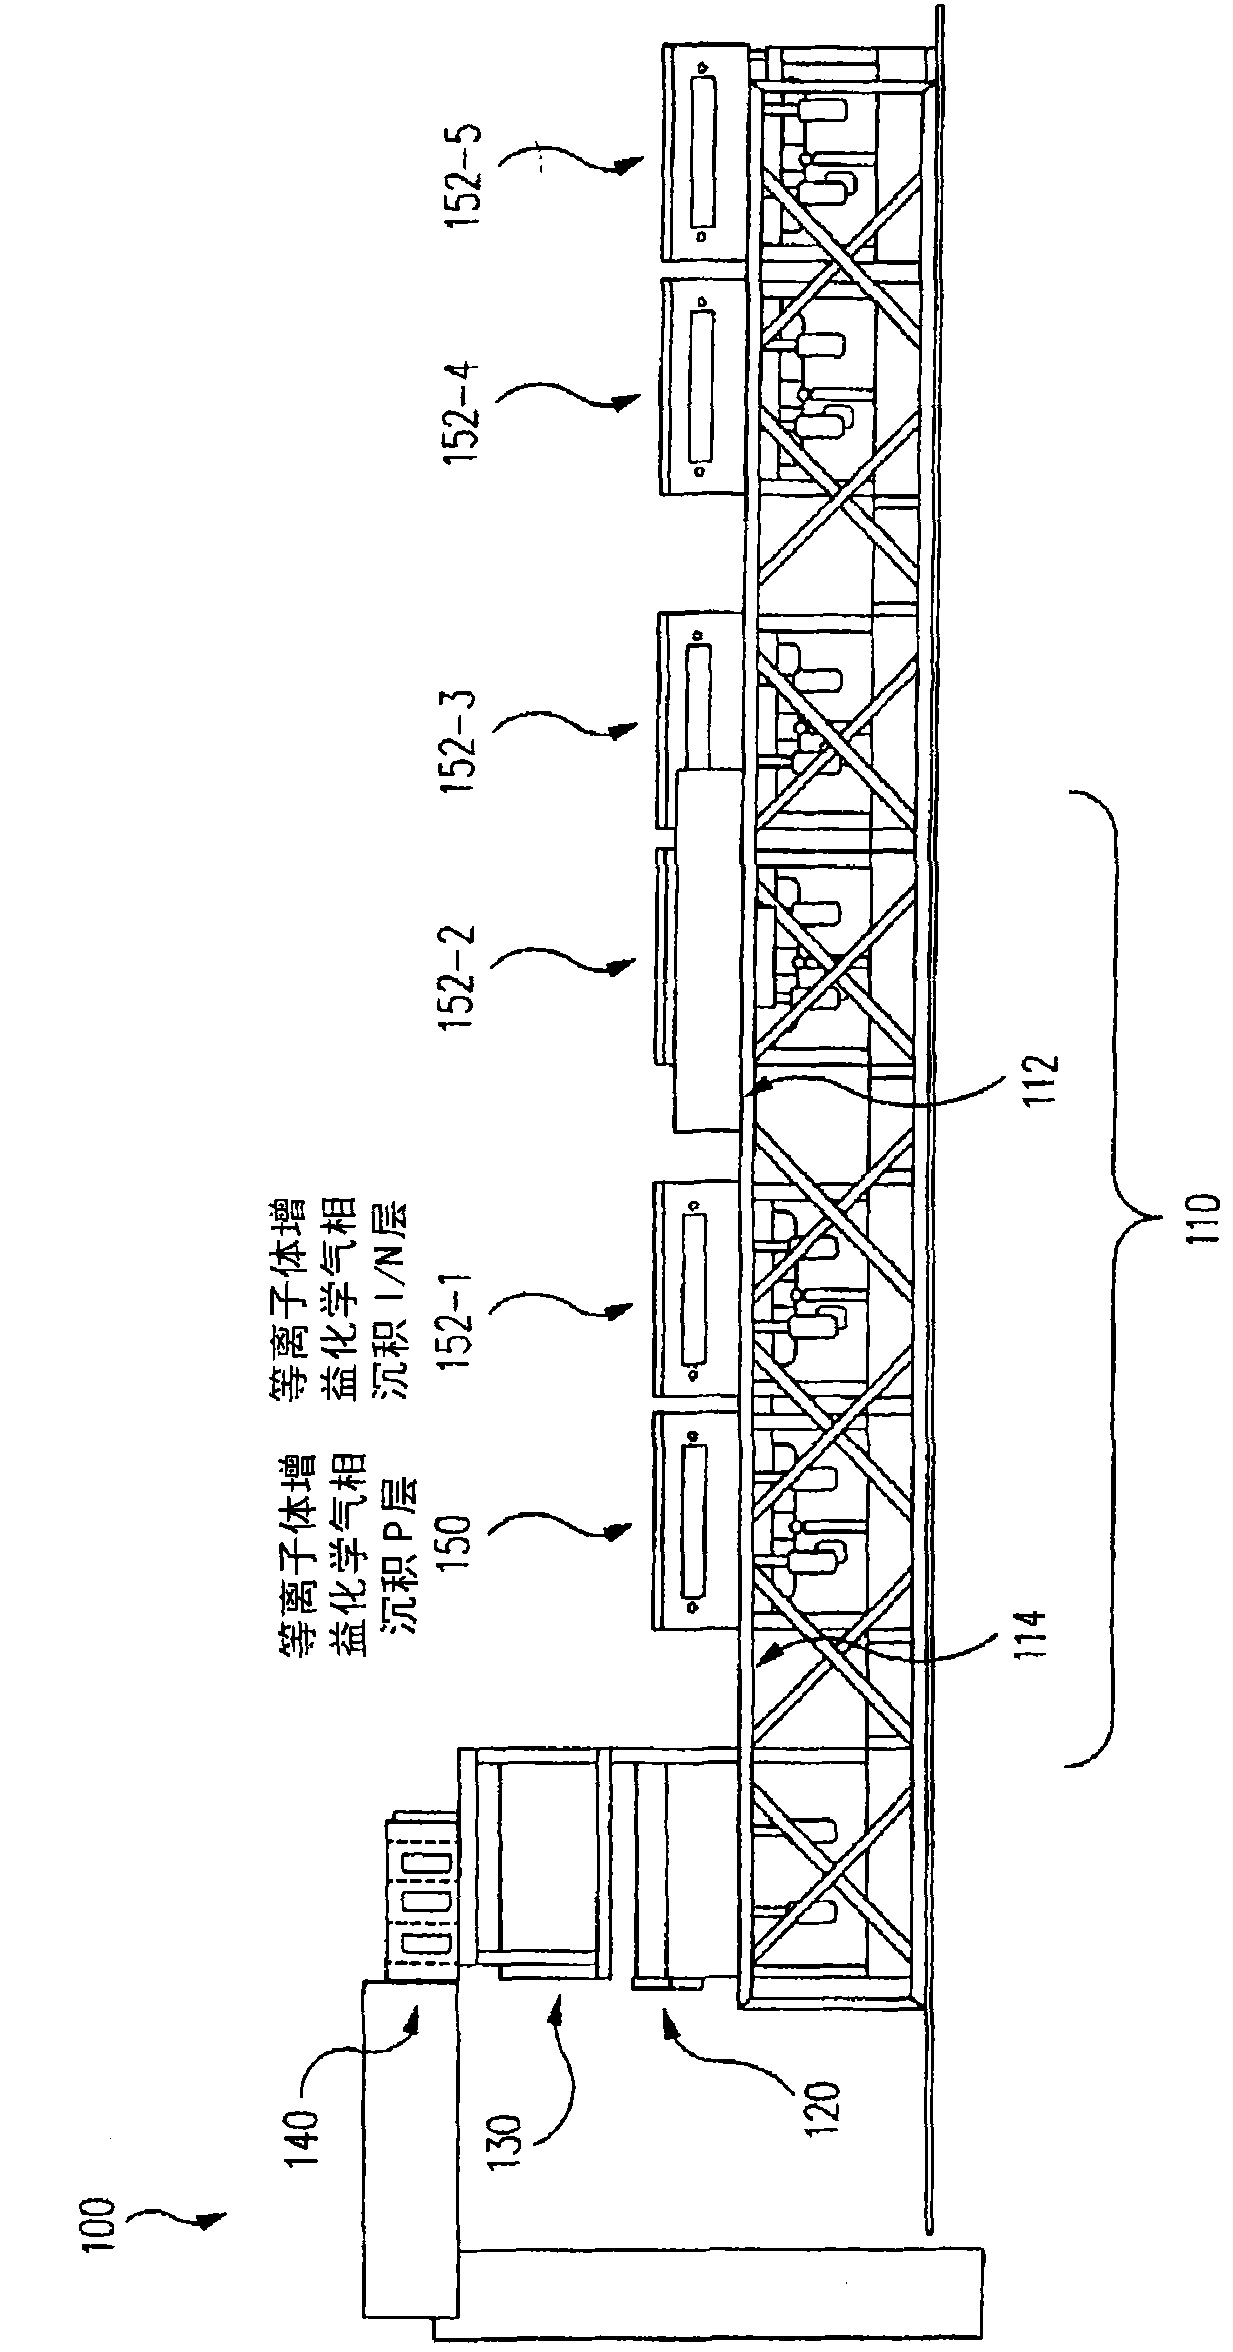 System for processing substrates, convey system and method and mobile transverse chamber